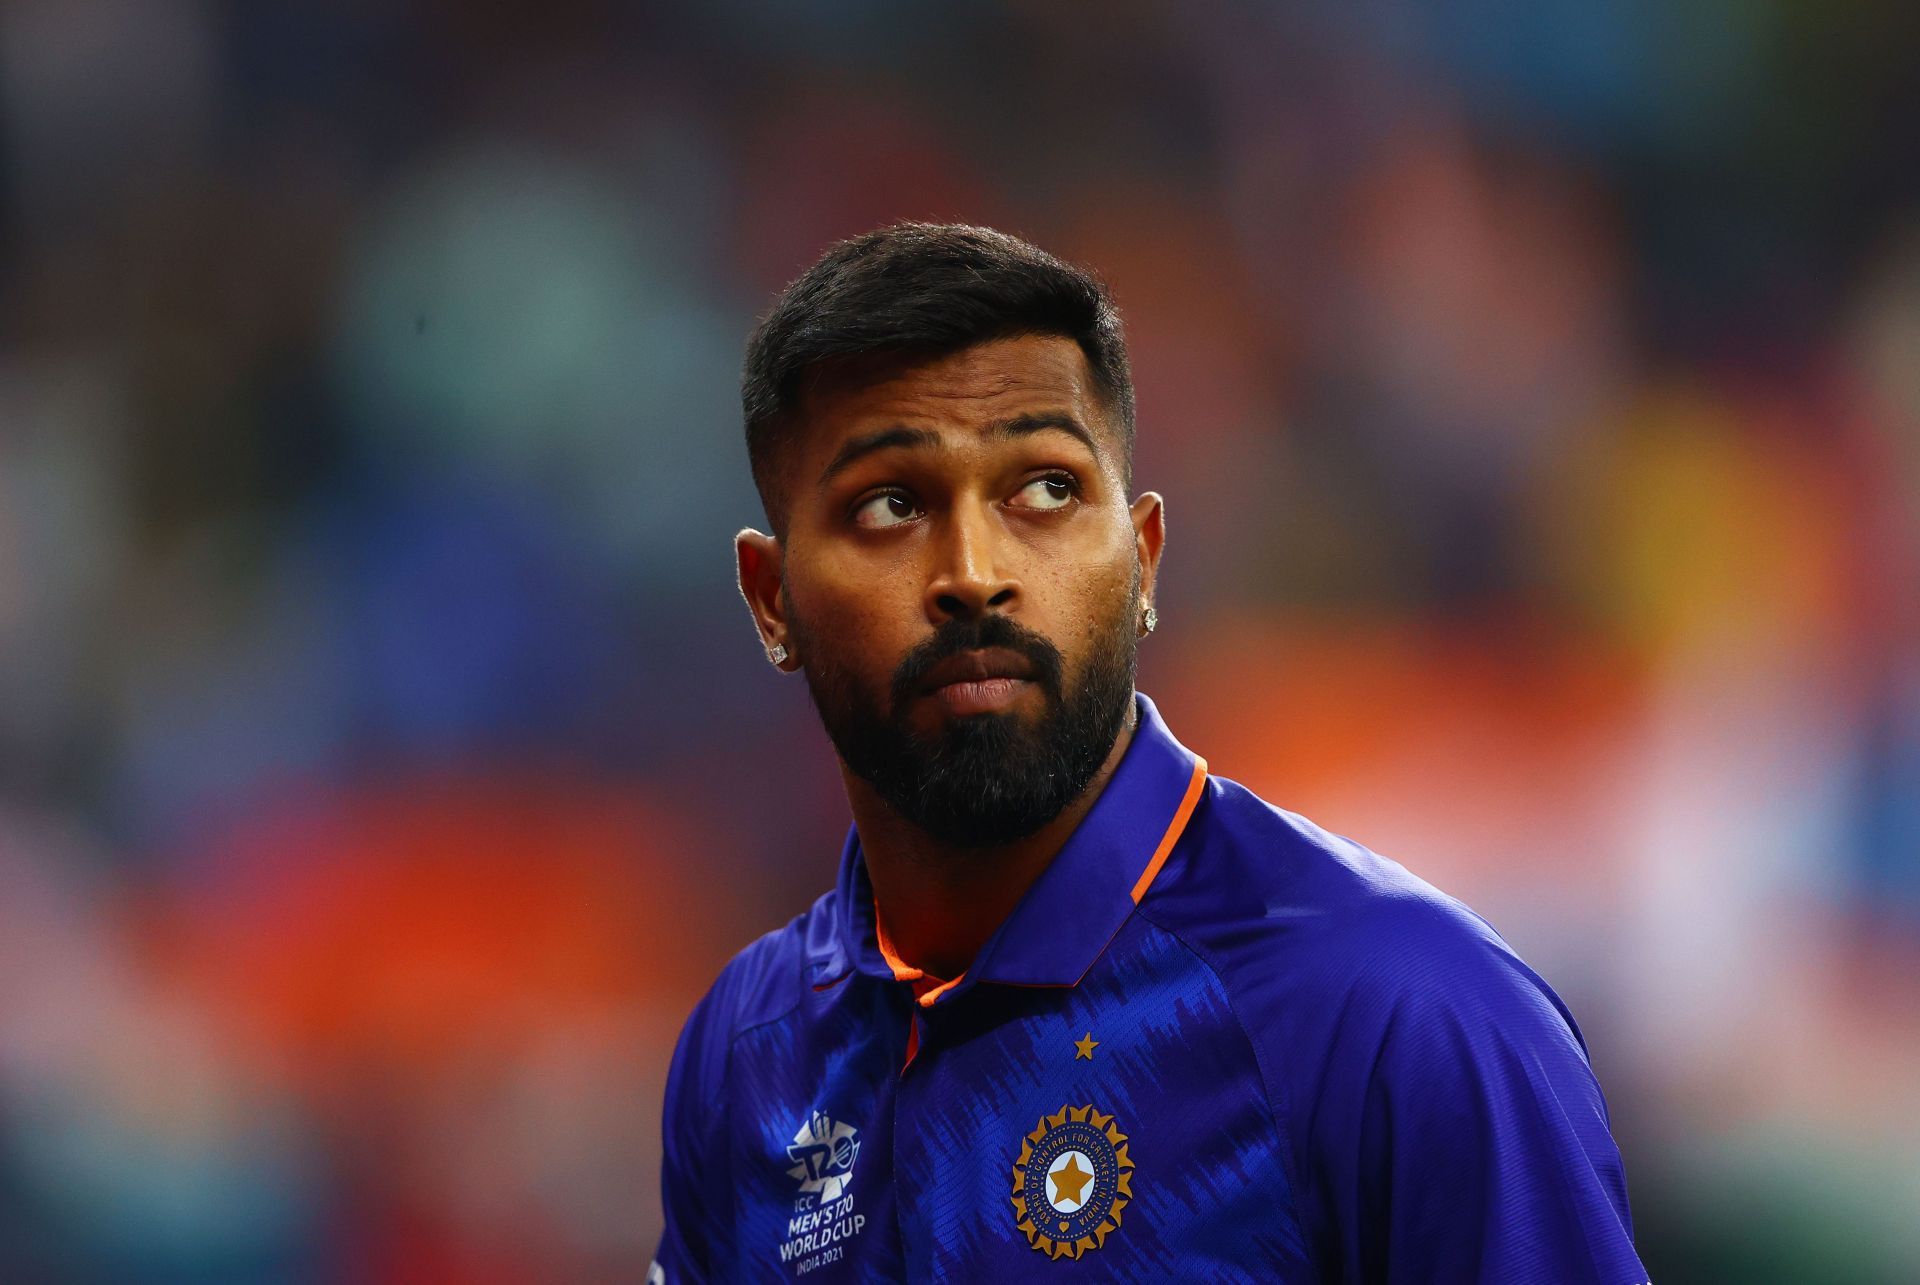 Hardik Pandya will likely play for a new franchise in the IPL 2022 season